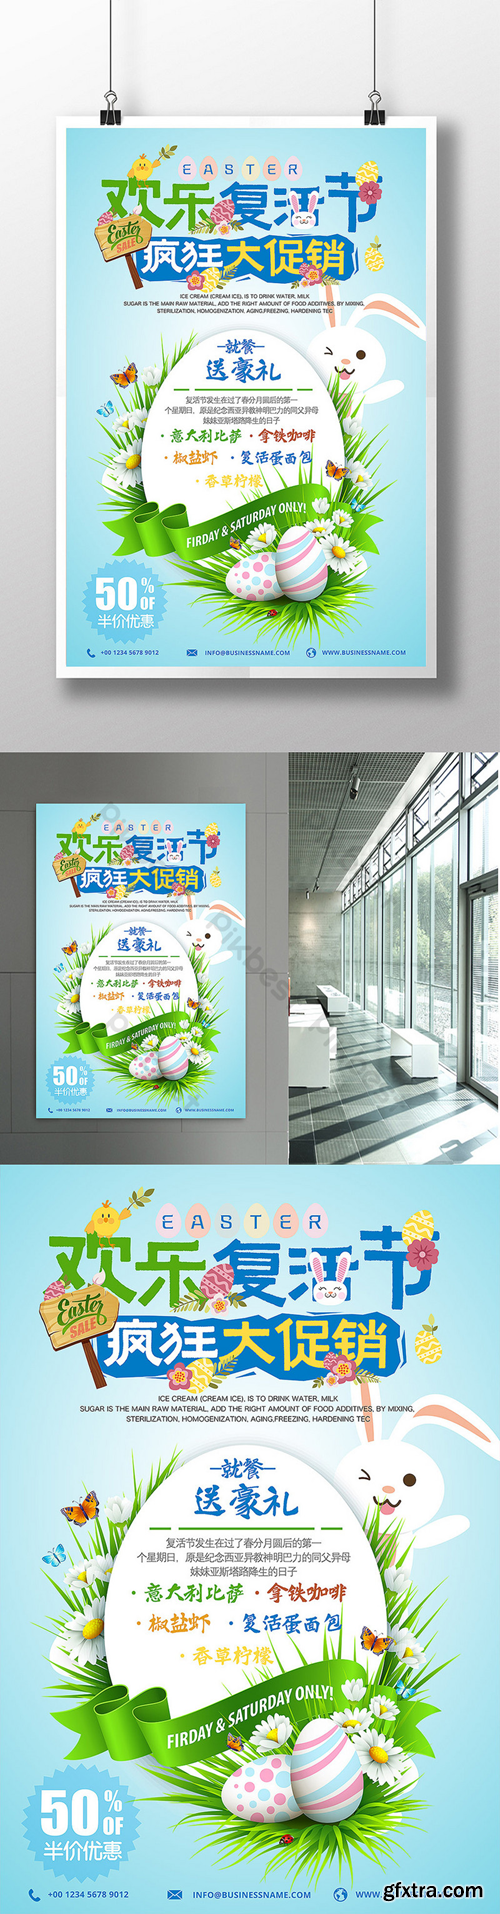 Blue Refreshing Easter Promotion Sale Poster Template Template PSD